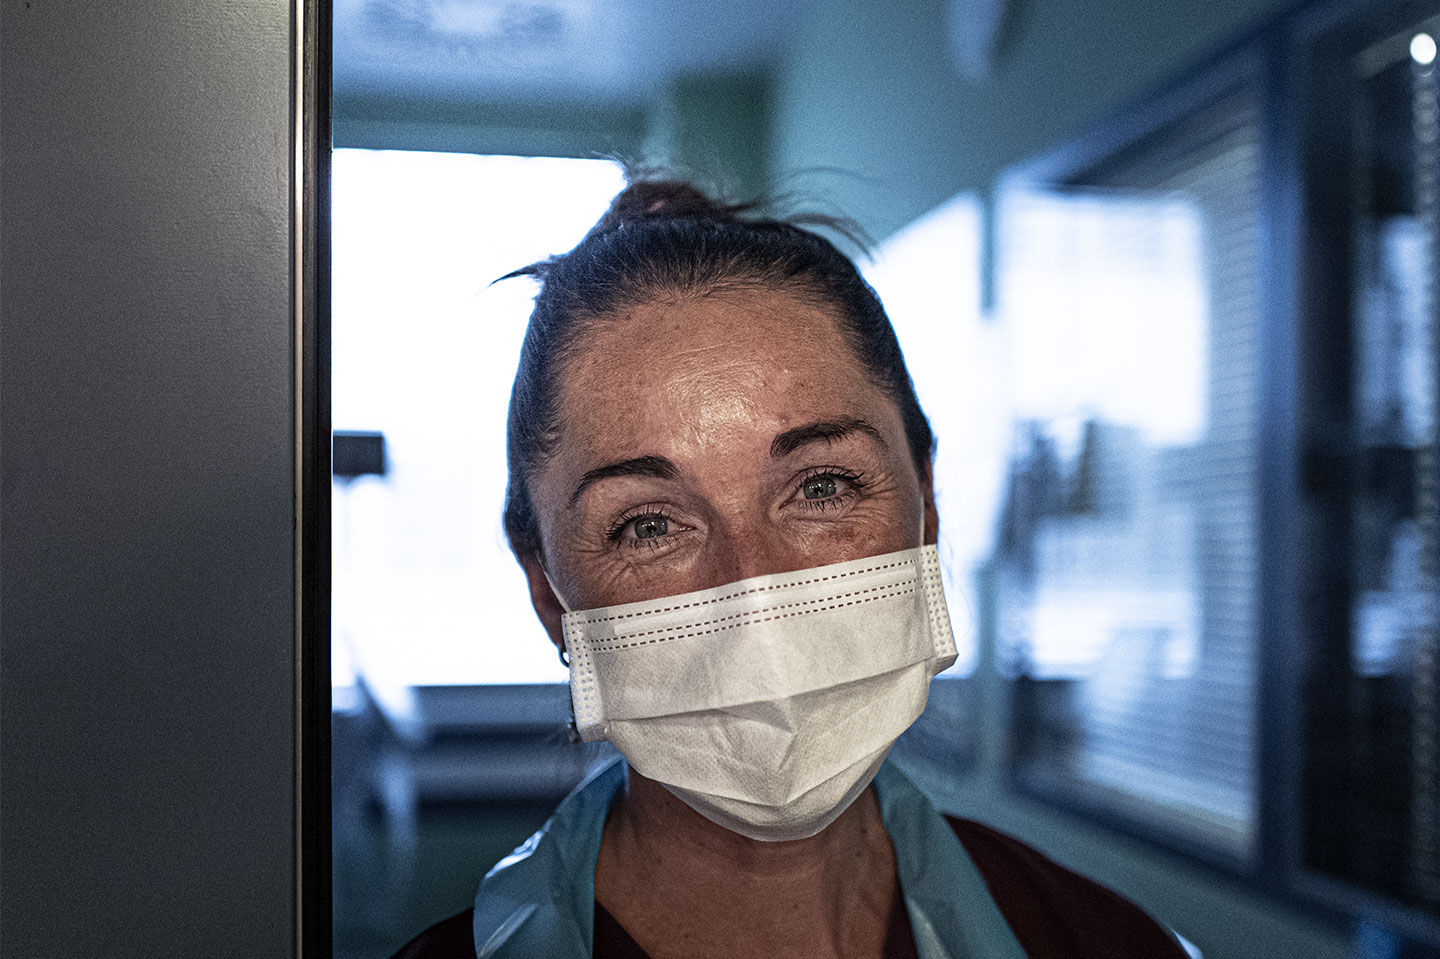 Nurse with face mask on smiling into camera